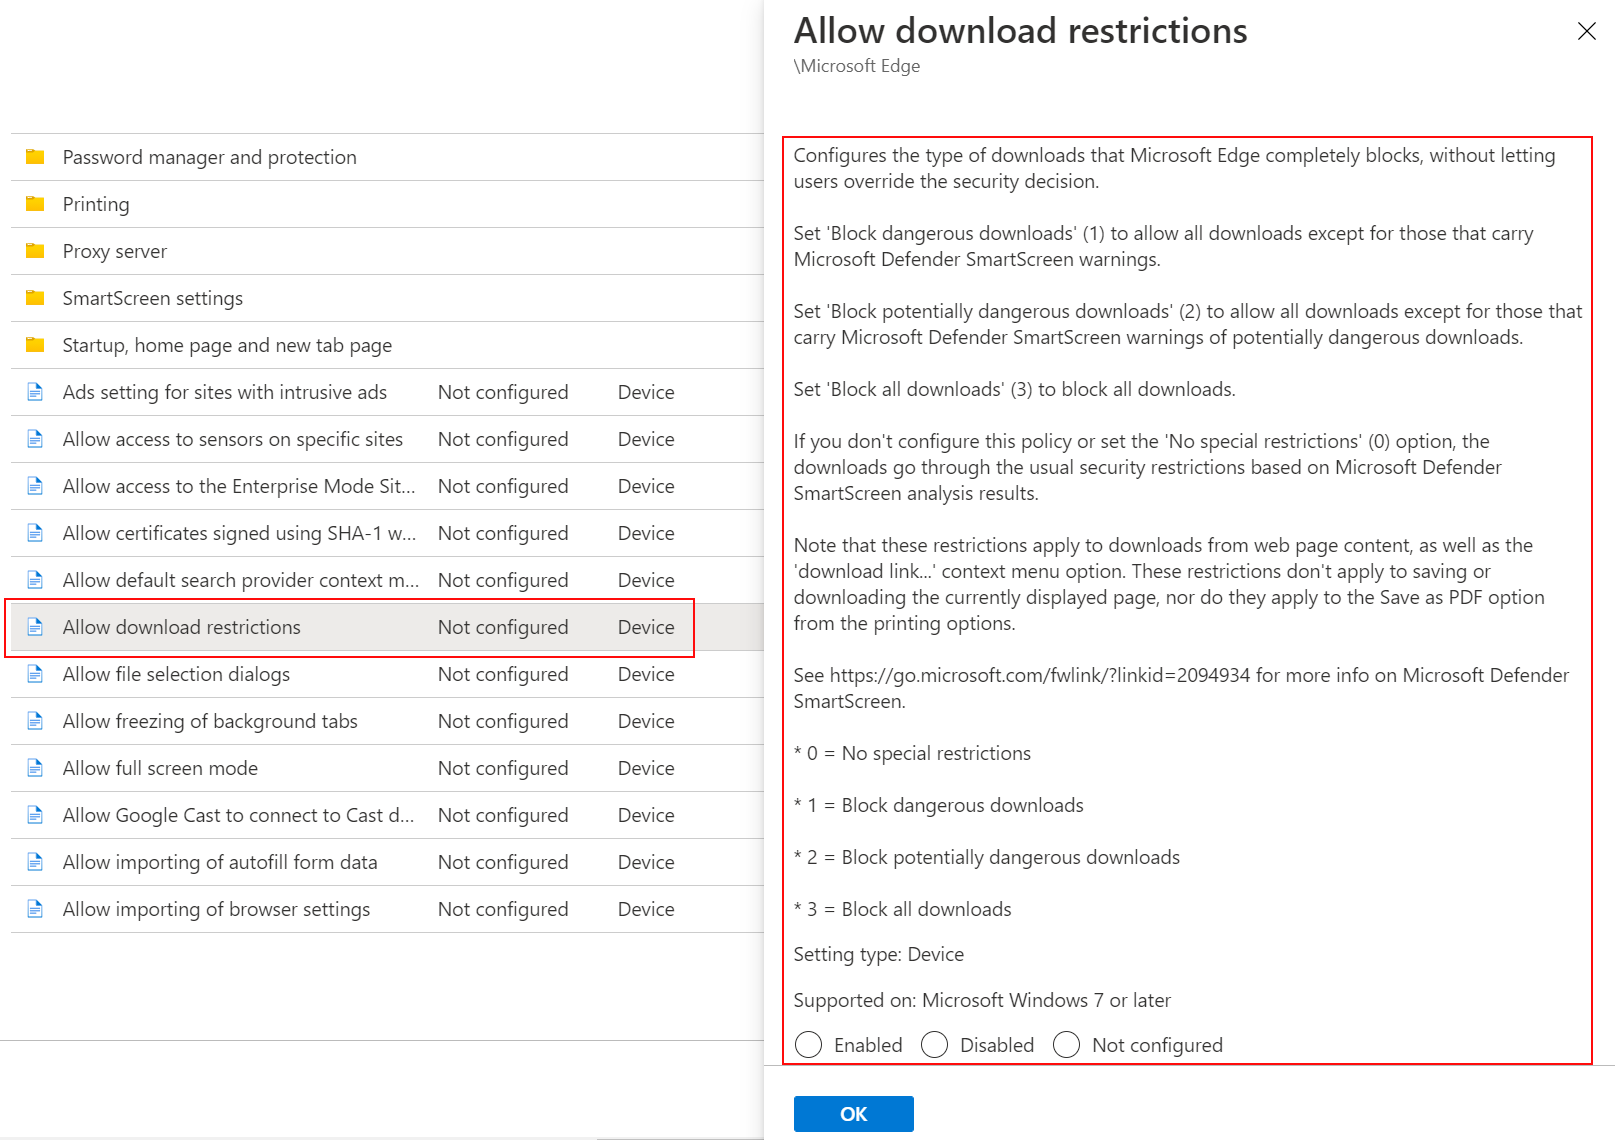 Select Microsoft Edge ADMX template and select a sample setting in Microsoft Intune and Intune admin center.